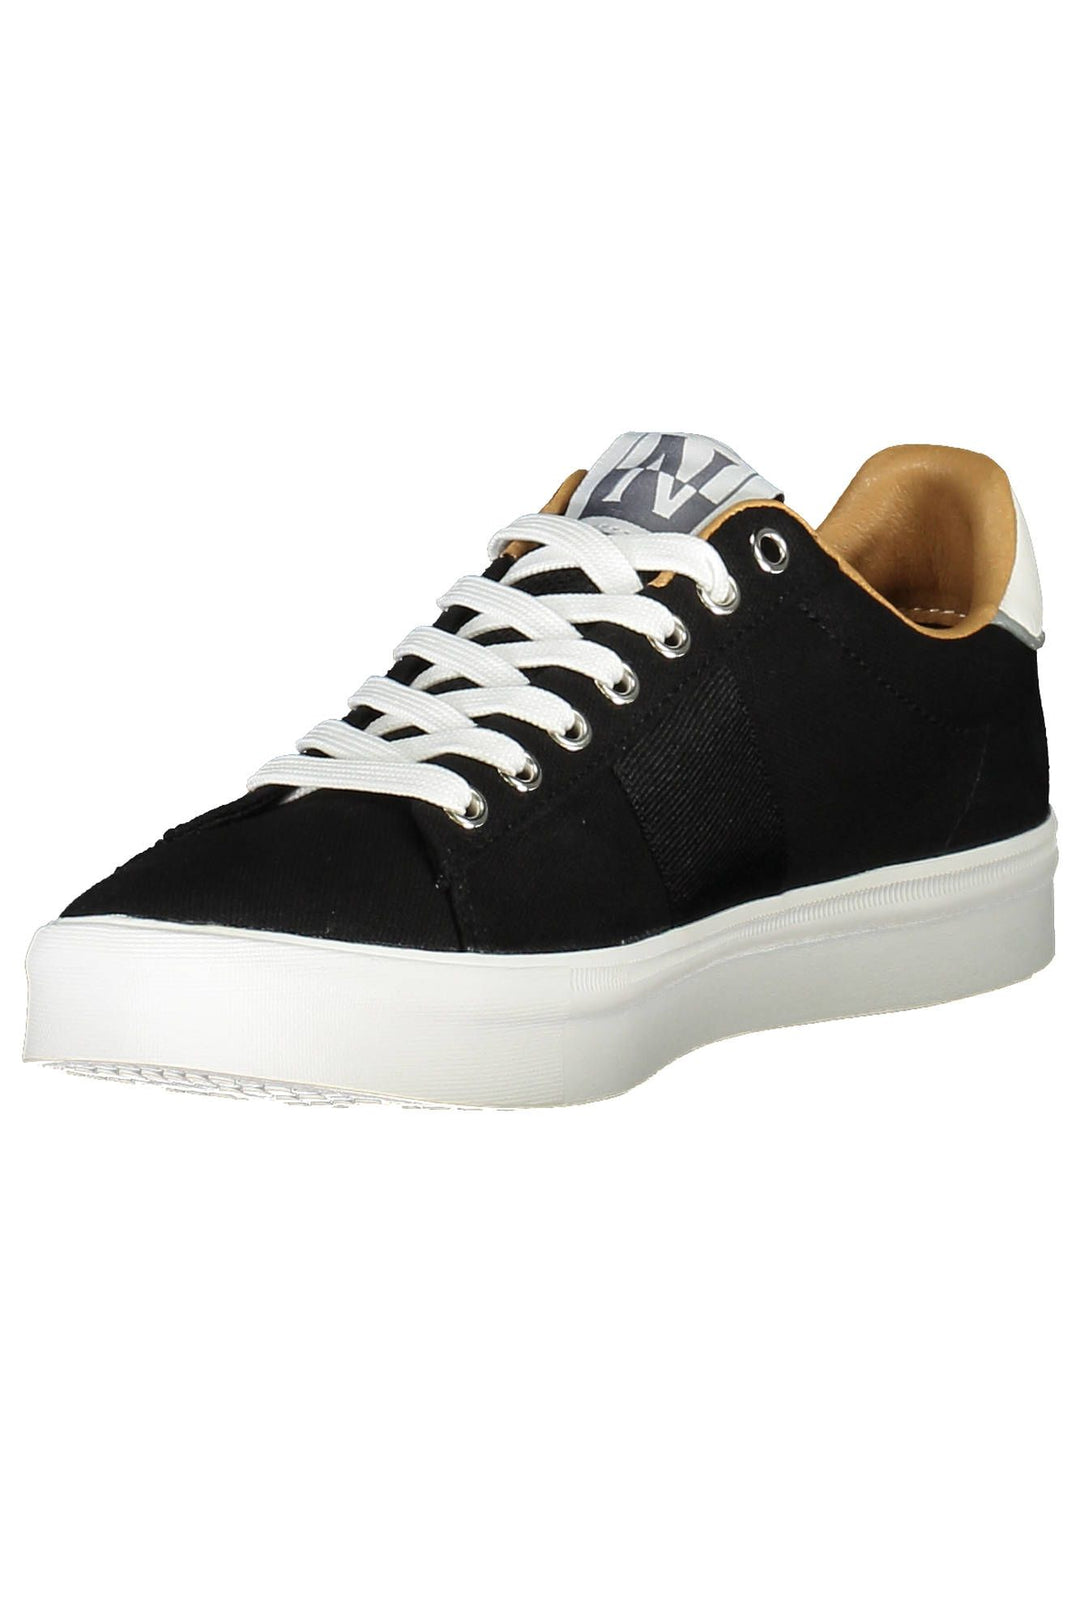 Napapijri Black Lace-Up Sneakers with Contrasting Accents